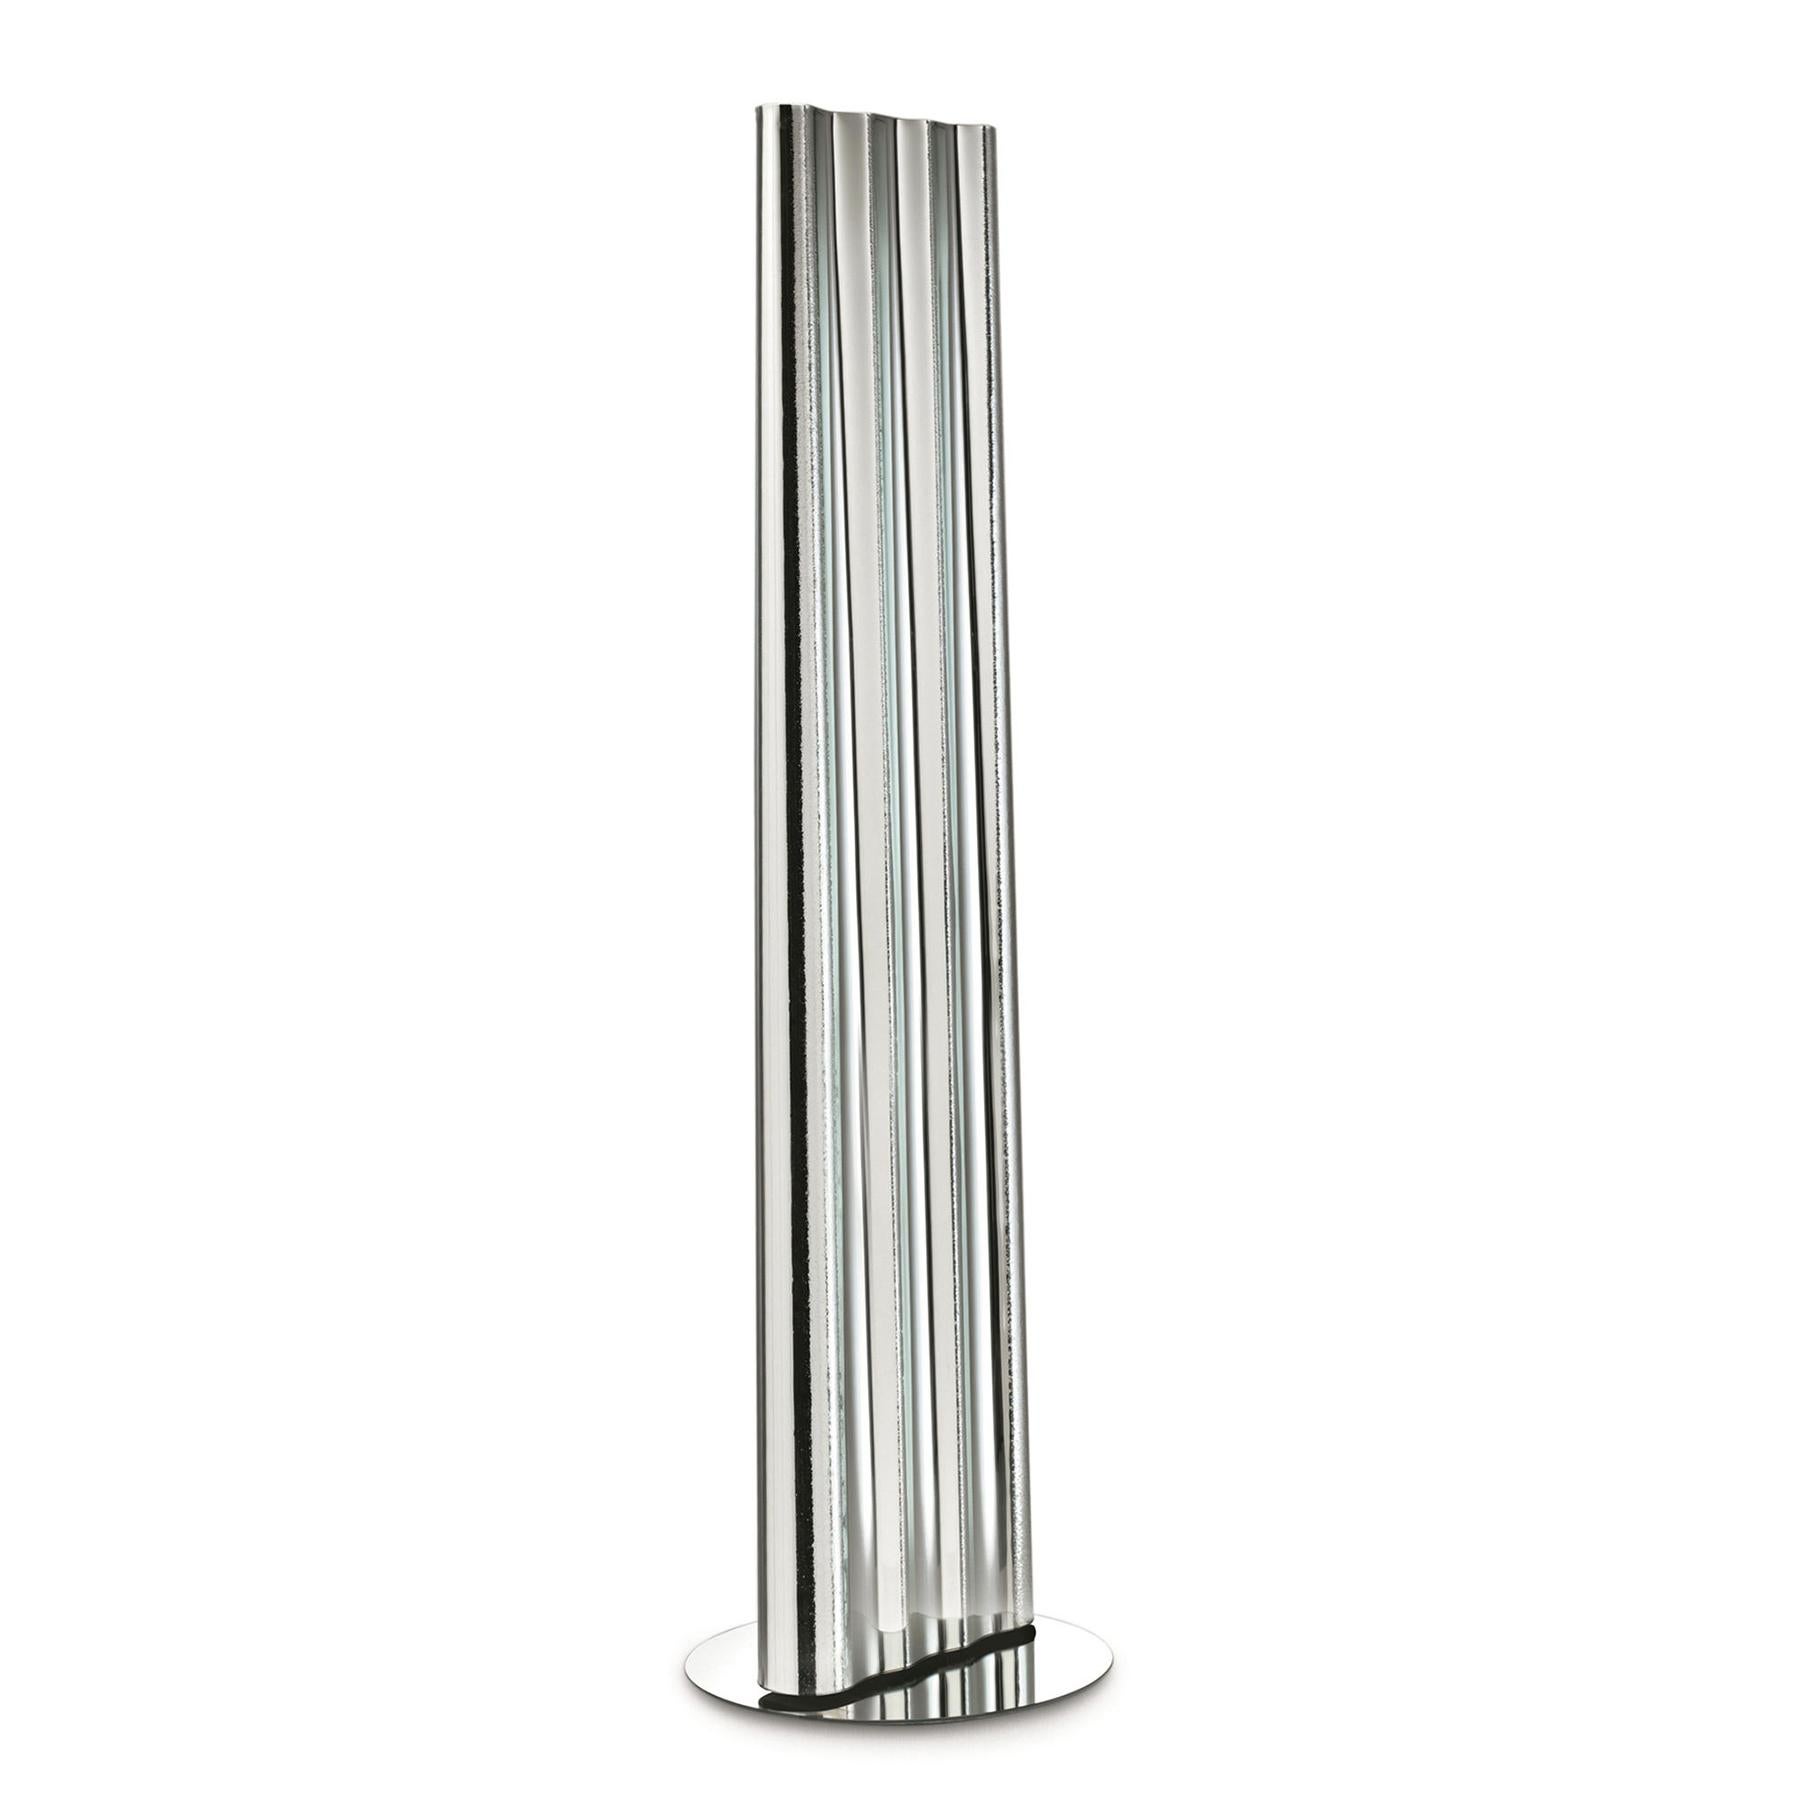 Mirror Looky with varnished steel frame and with clear mirror
glass, 6mm thickness, mirror glass made with curved back
silvered glass case. On swivel floor polished mirrored stainless
steel base, 8 mm thickness.

 